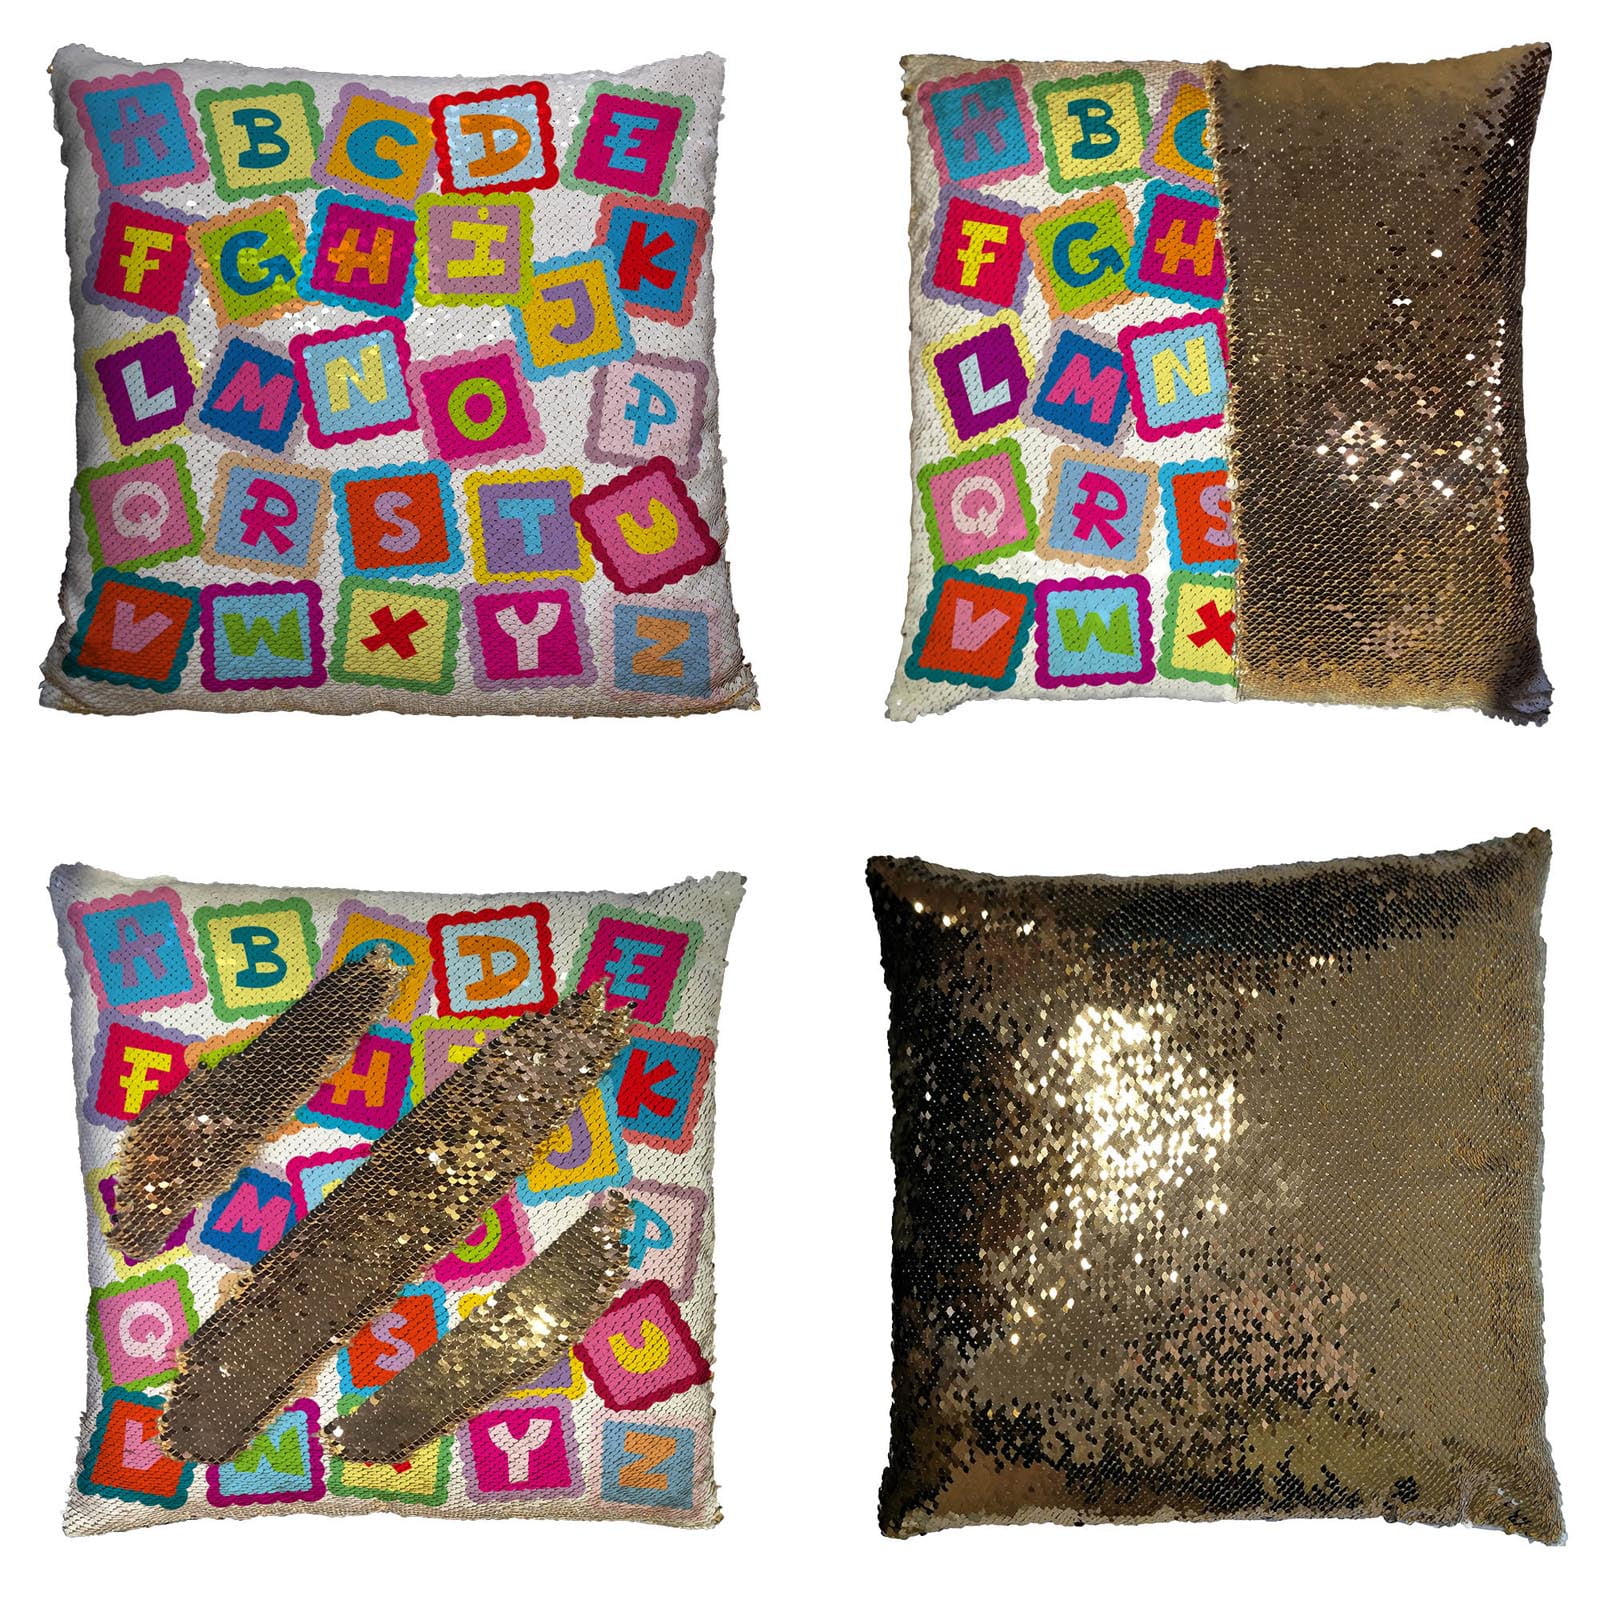 YKCG Funny Educational Alphabet ABC Reversible Mermaid Sequin Pillow Case  Pillow Cover 18x18 inches 